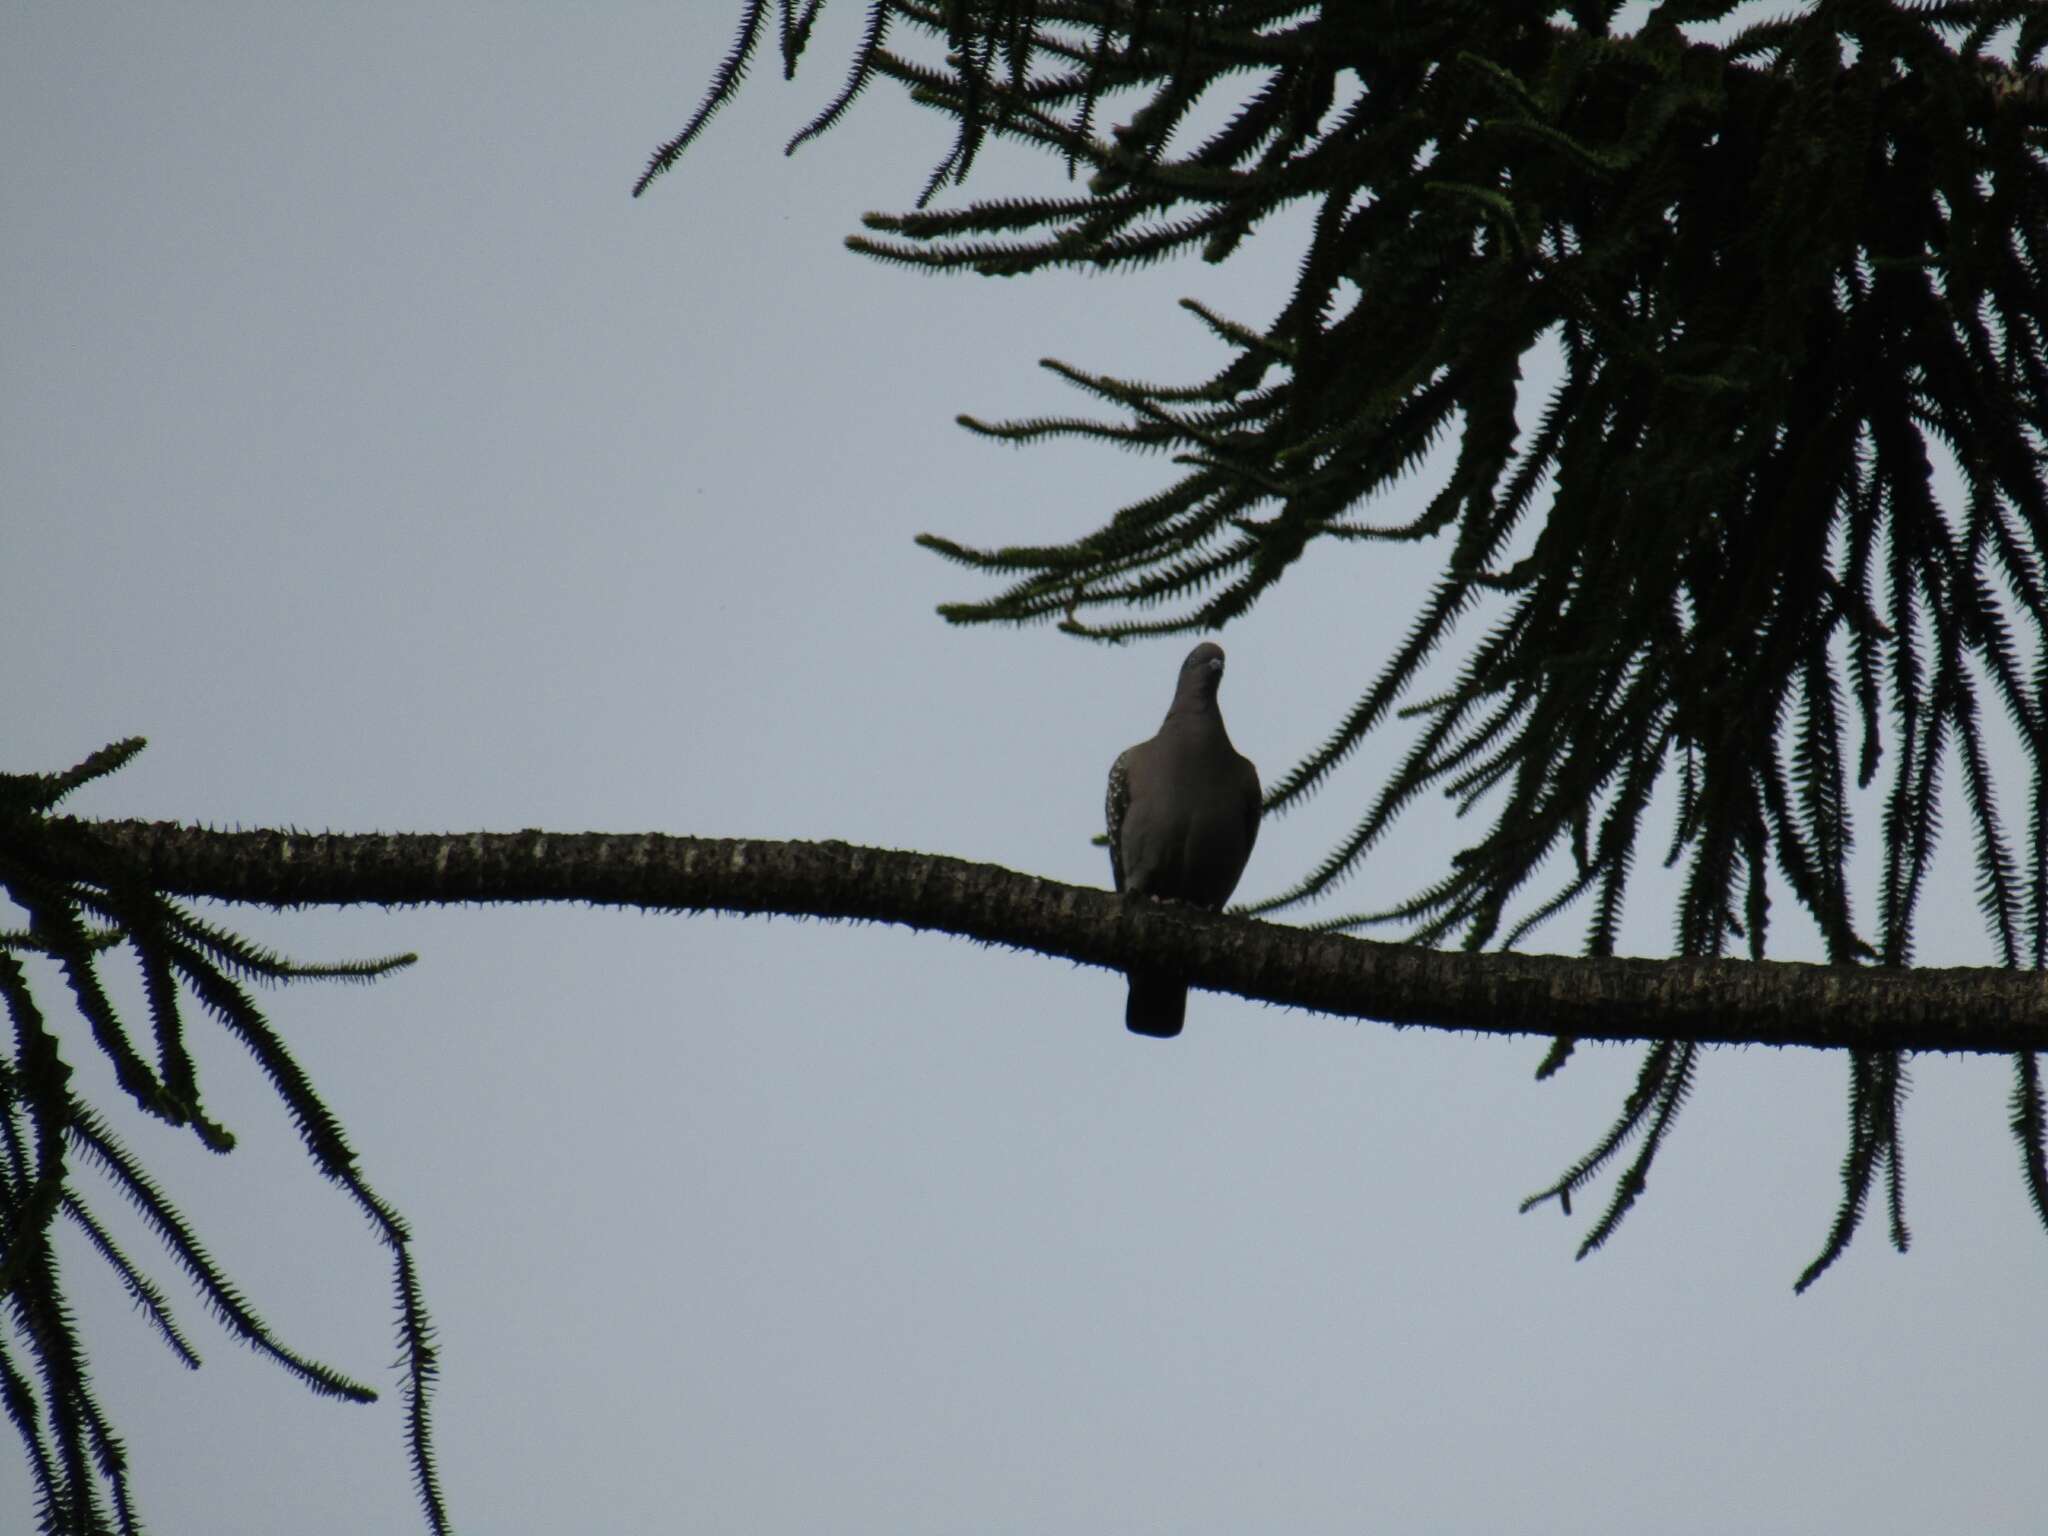 Image of Spot-winged Pigeon